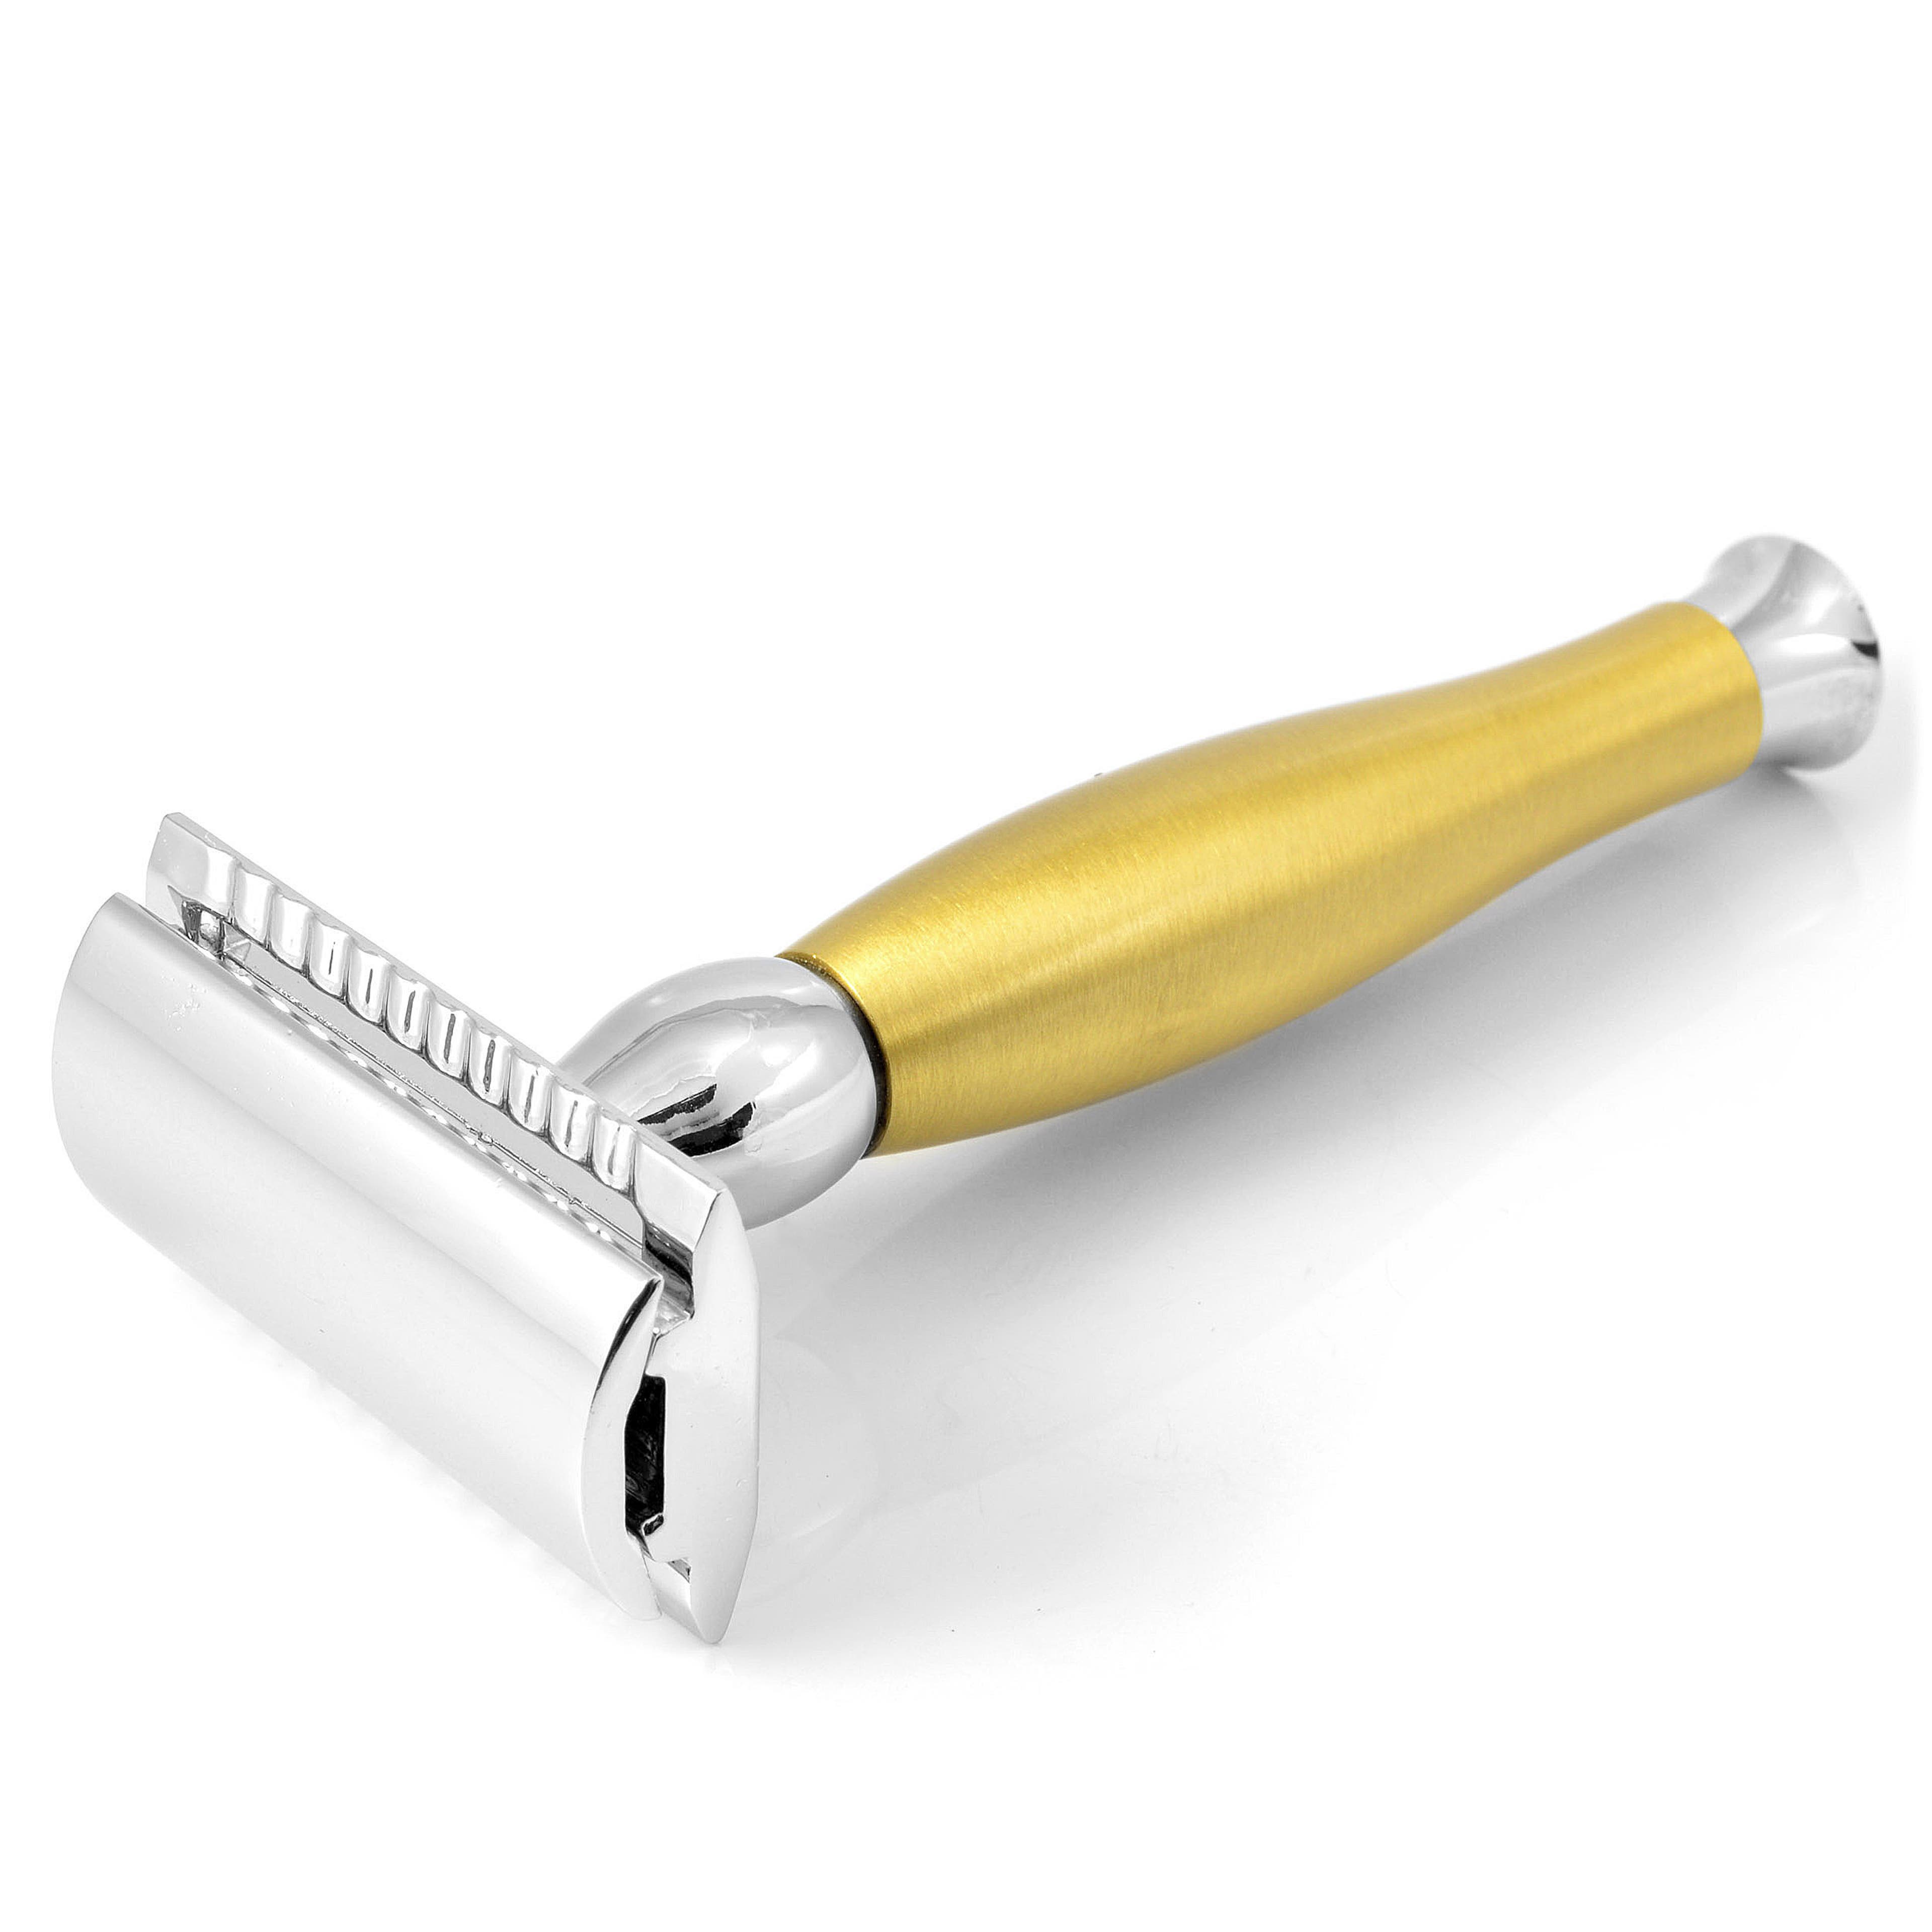 Gold-Colored Stainless Steel DE Razor